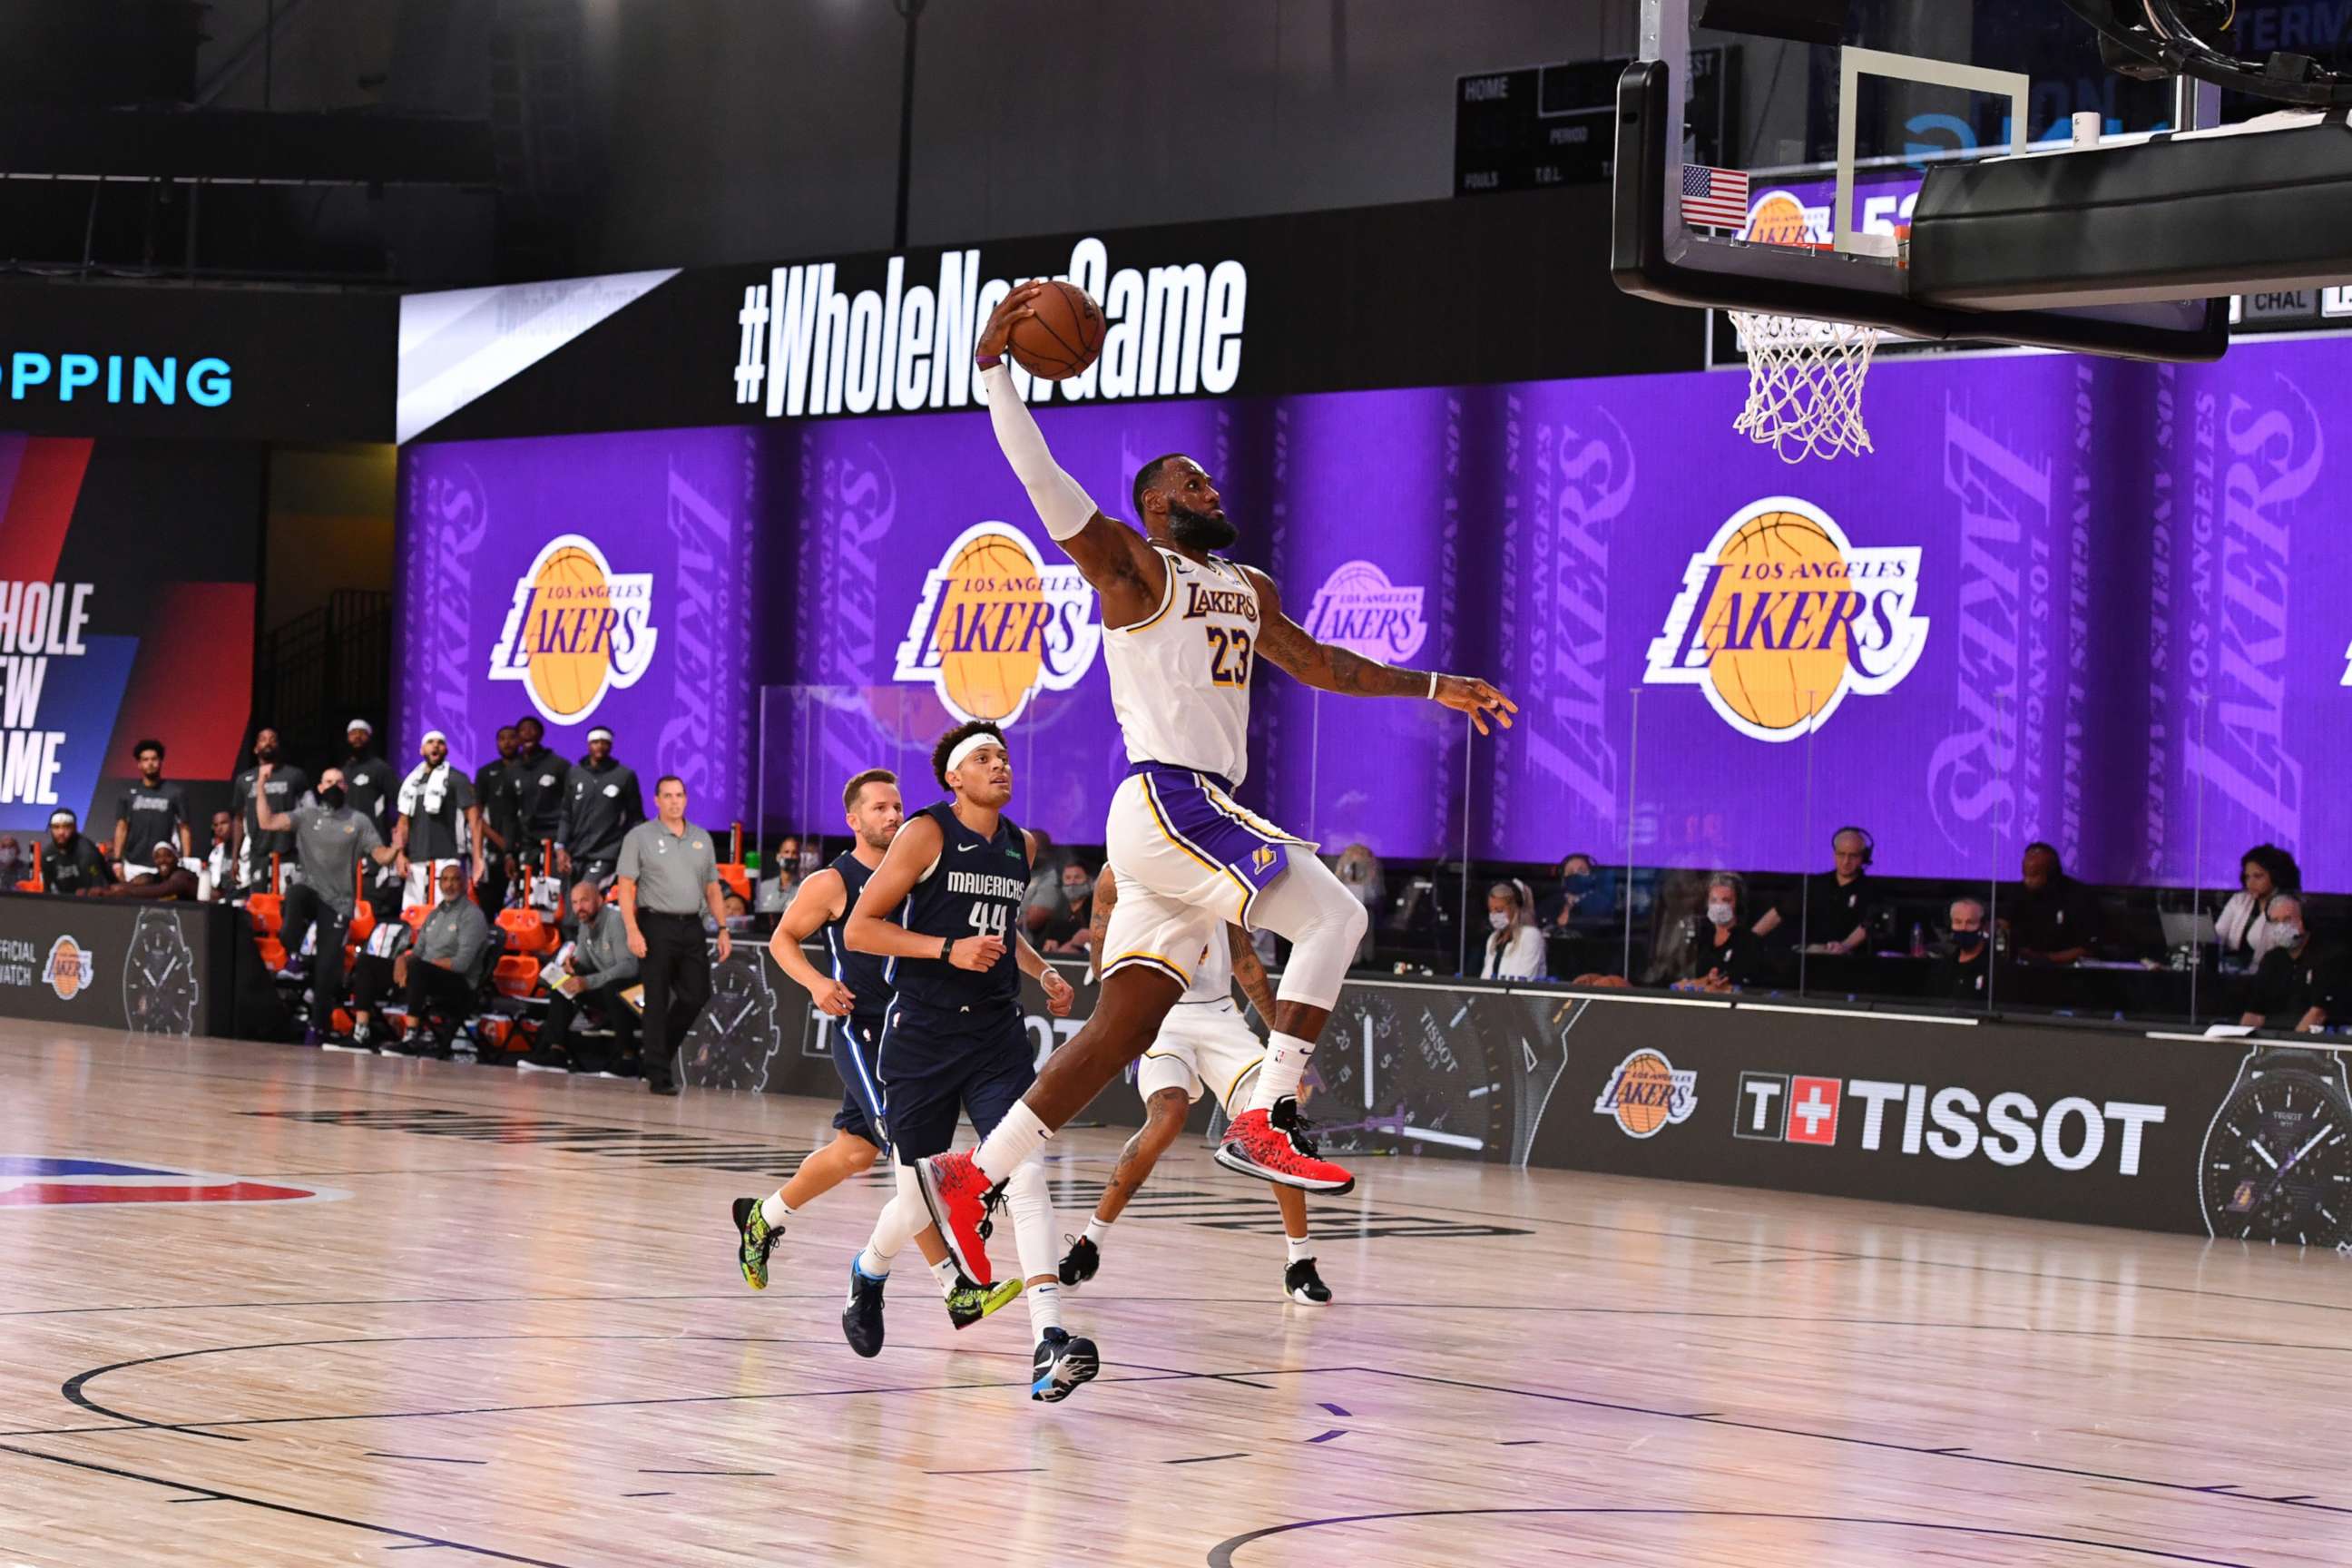 PHOTO: LeBron James of the Los Angeles Lakers dunks the ball against the Dallas Mavericks on July 23, 2020, at the Visa Athletic Center at ESPN Wide World of Sports Complex in Orlando, Fla.